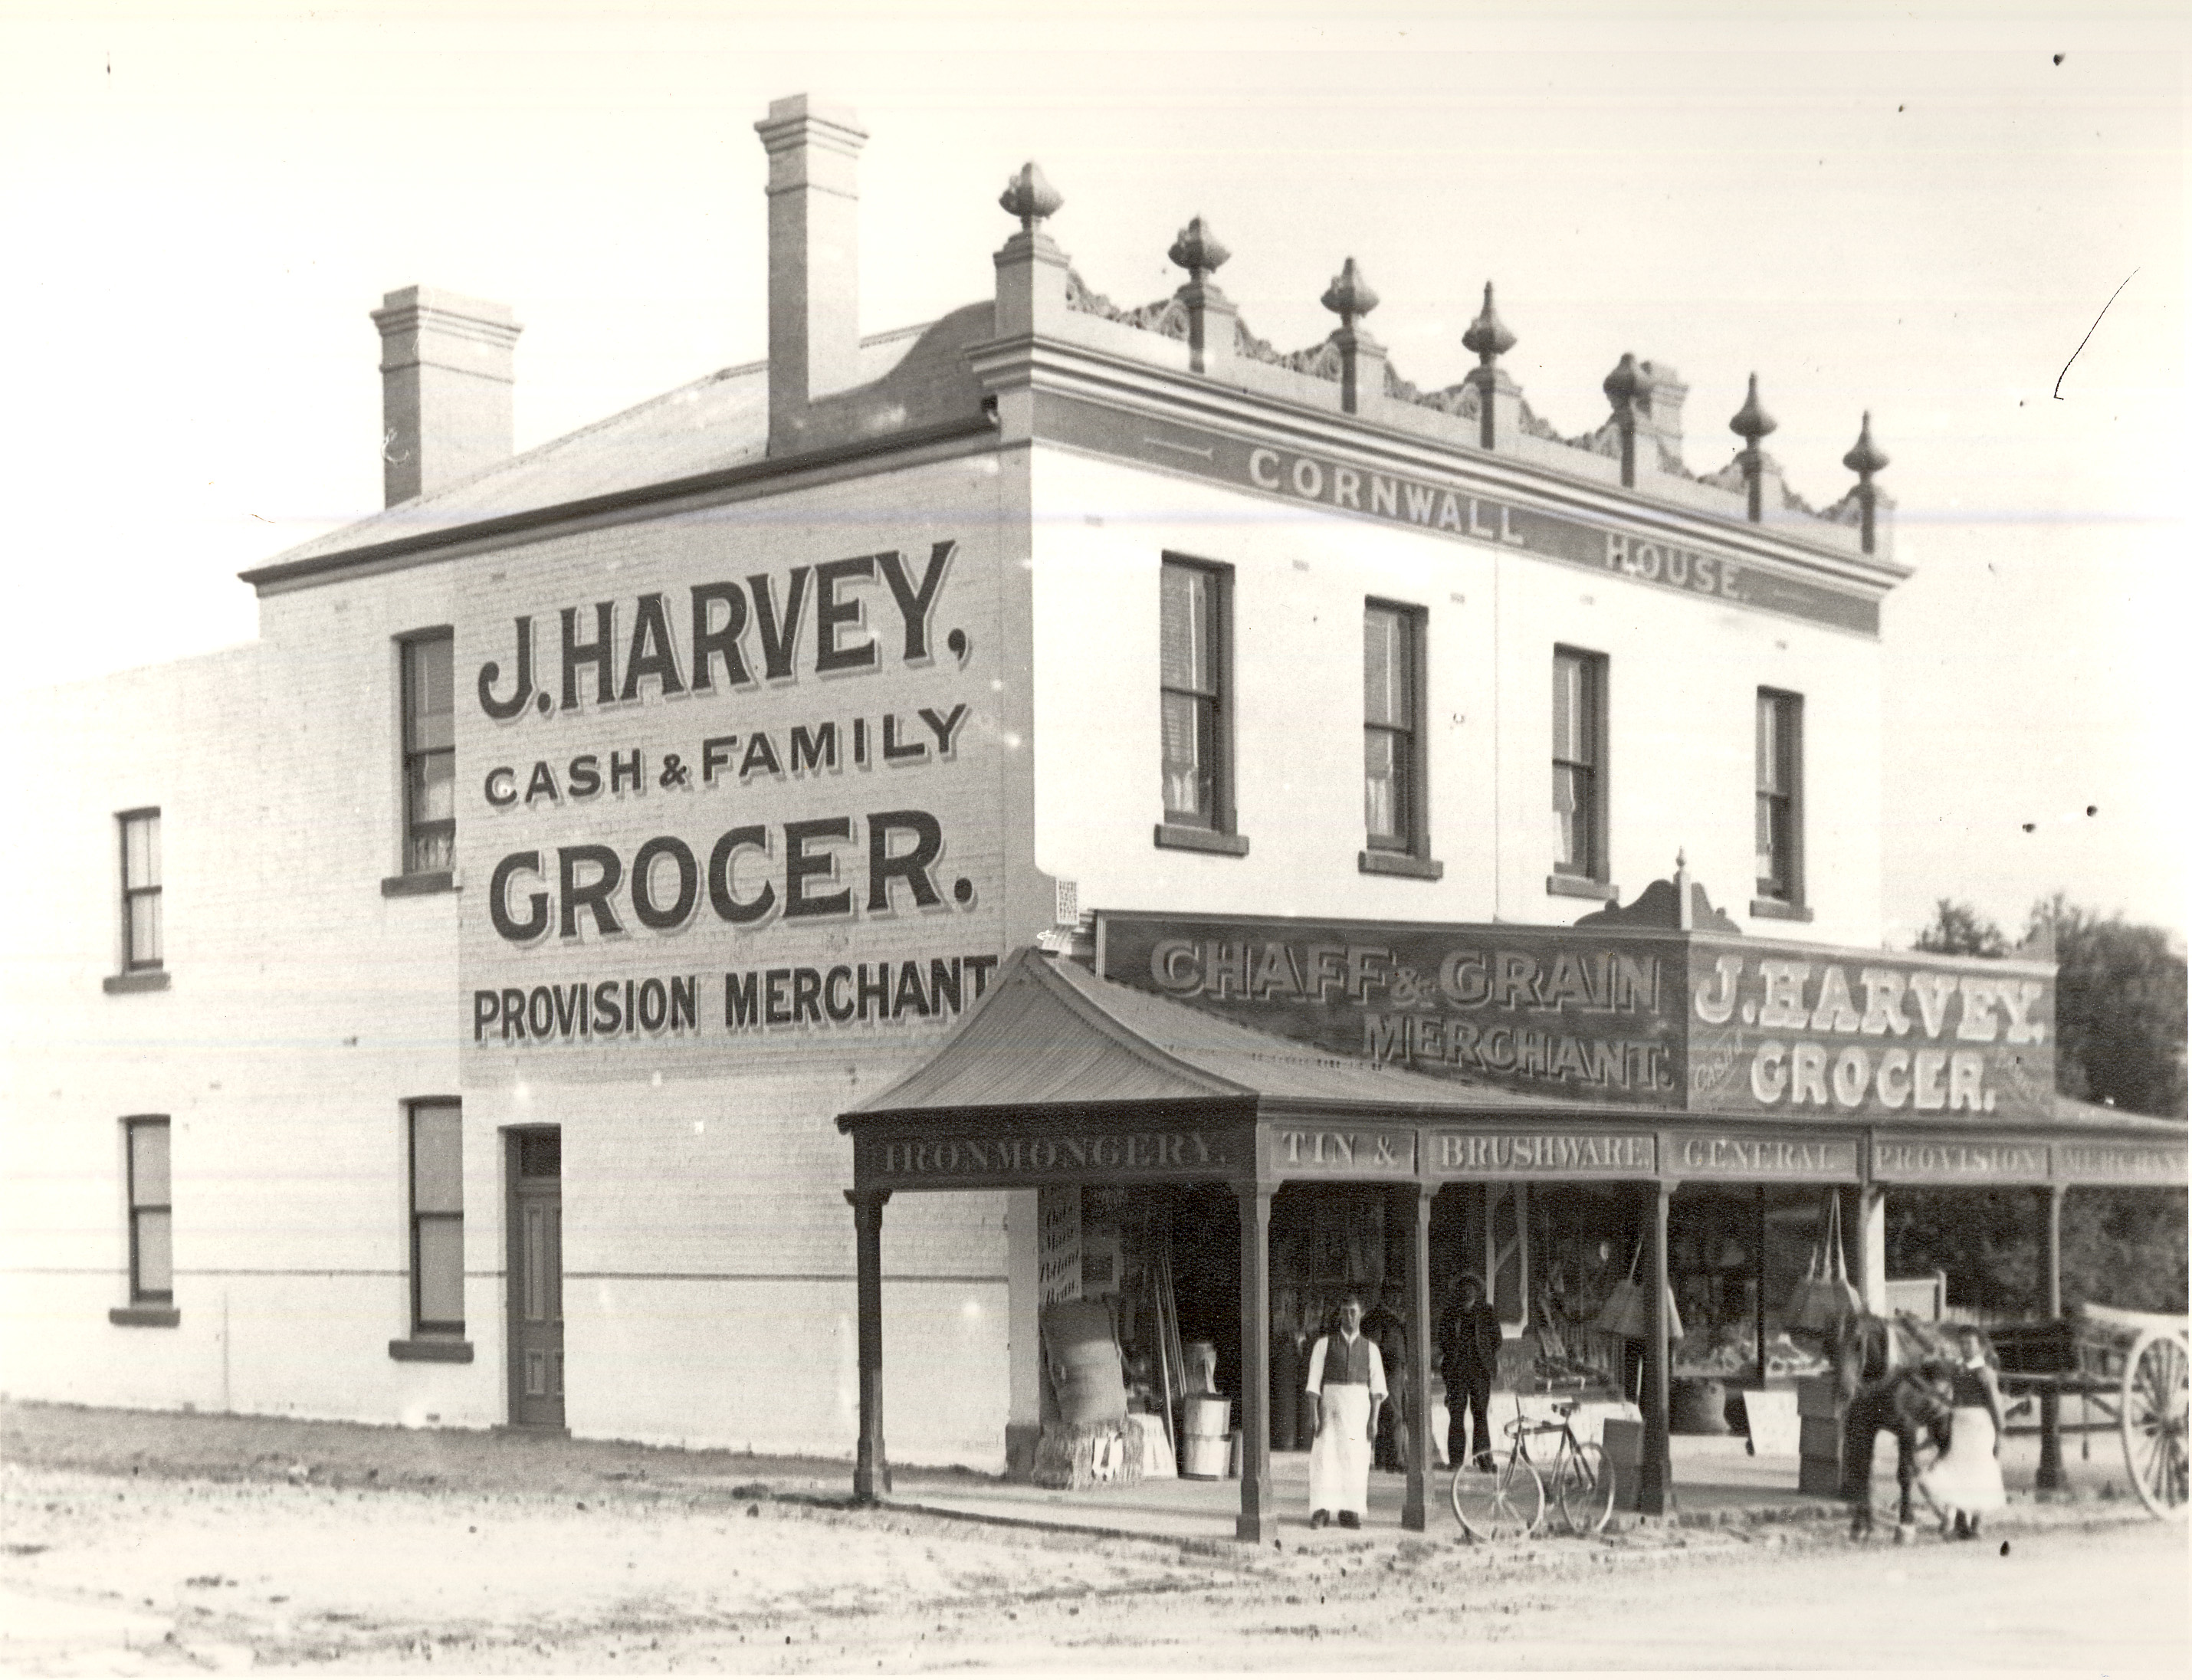 Image of Harvey's general store in the early 1900s. [LHRN4972]